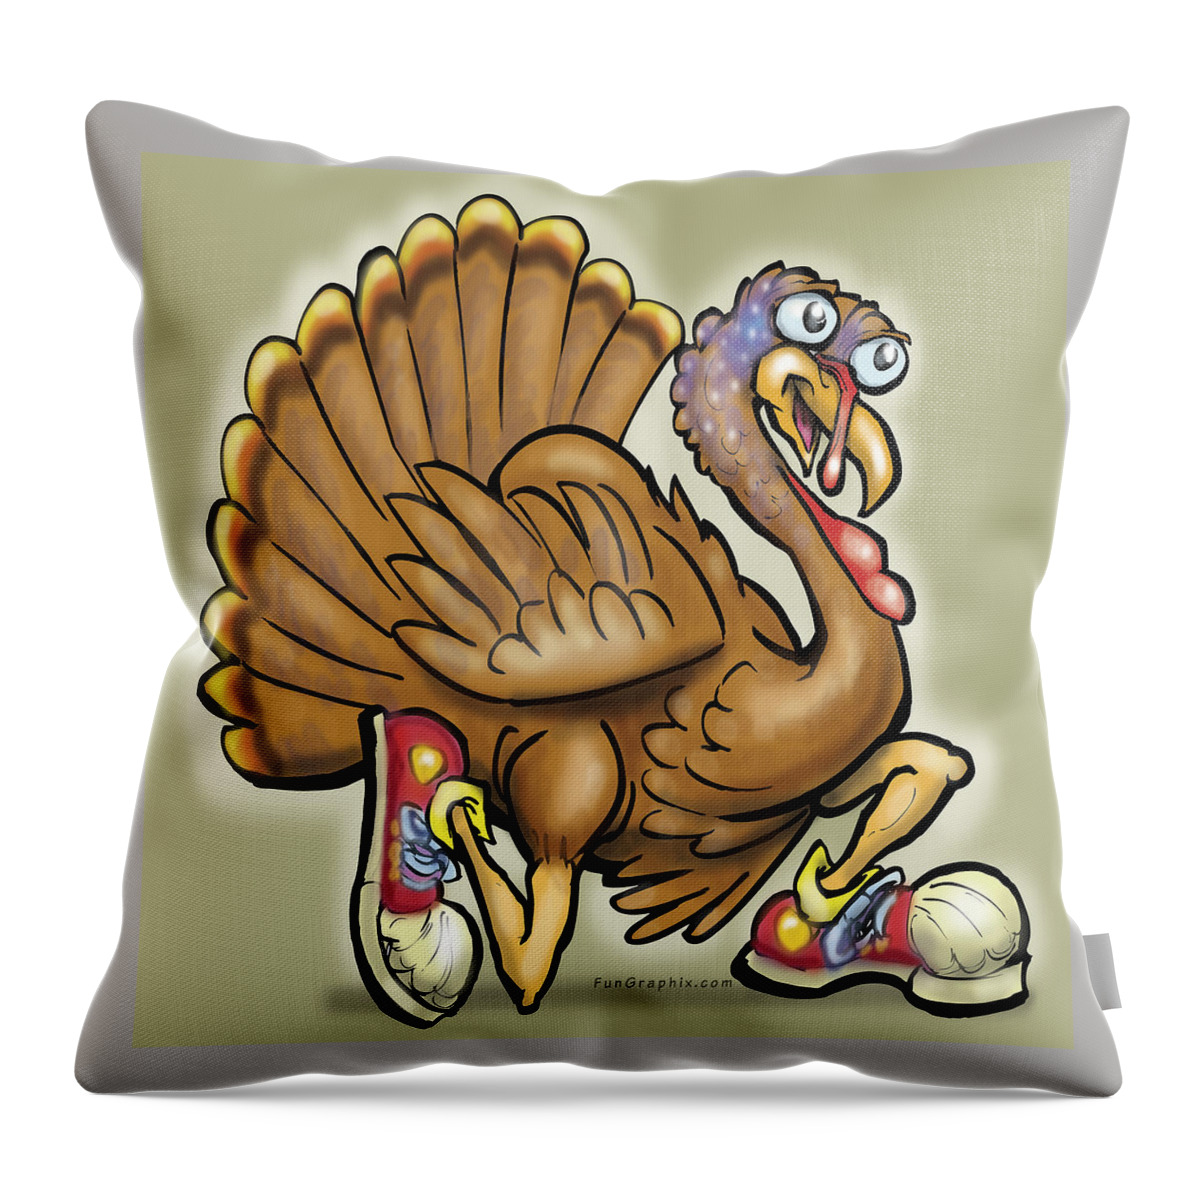 Thanksgiving Throw Pillow featuring the digital art Turkey by Kevin Middleton